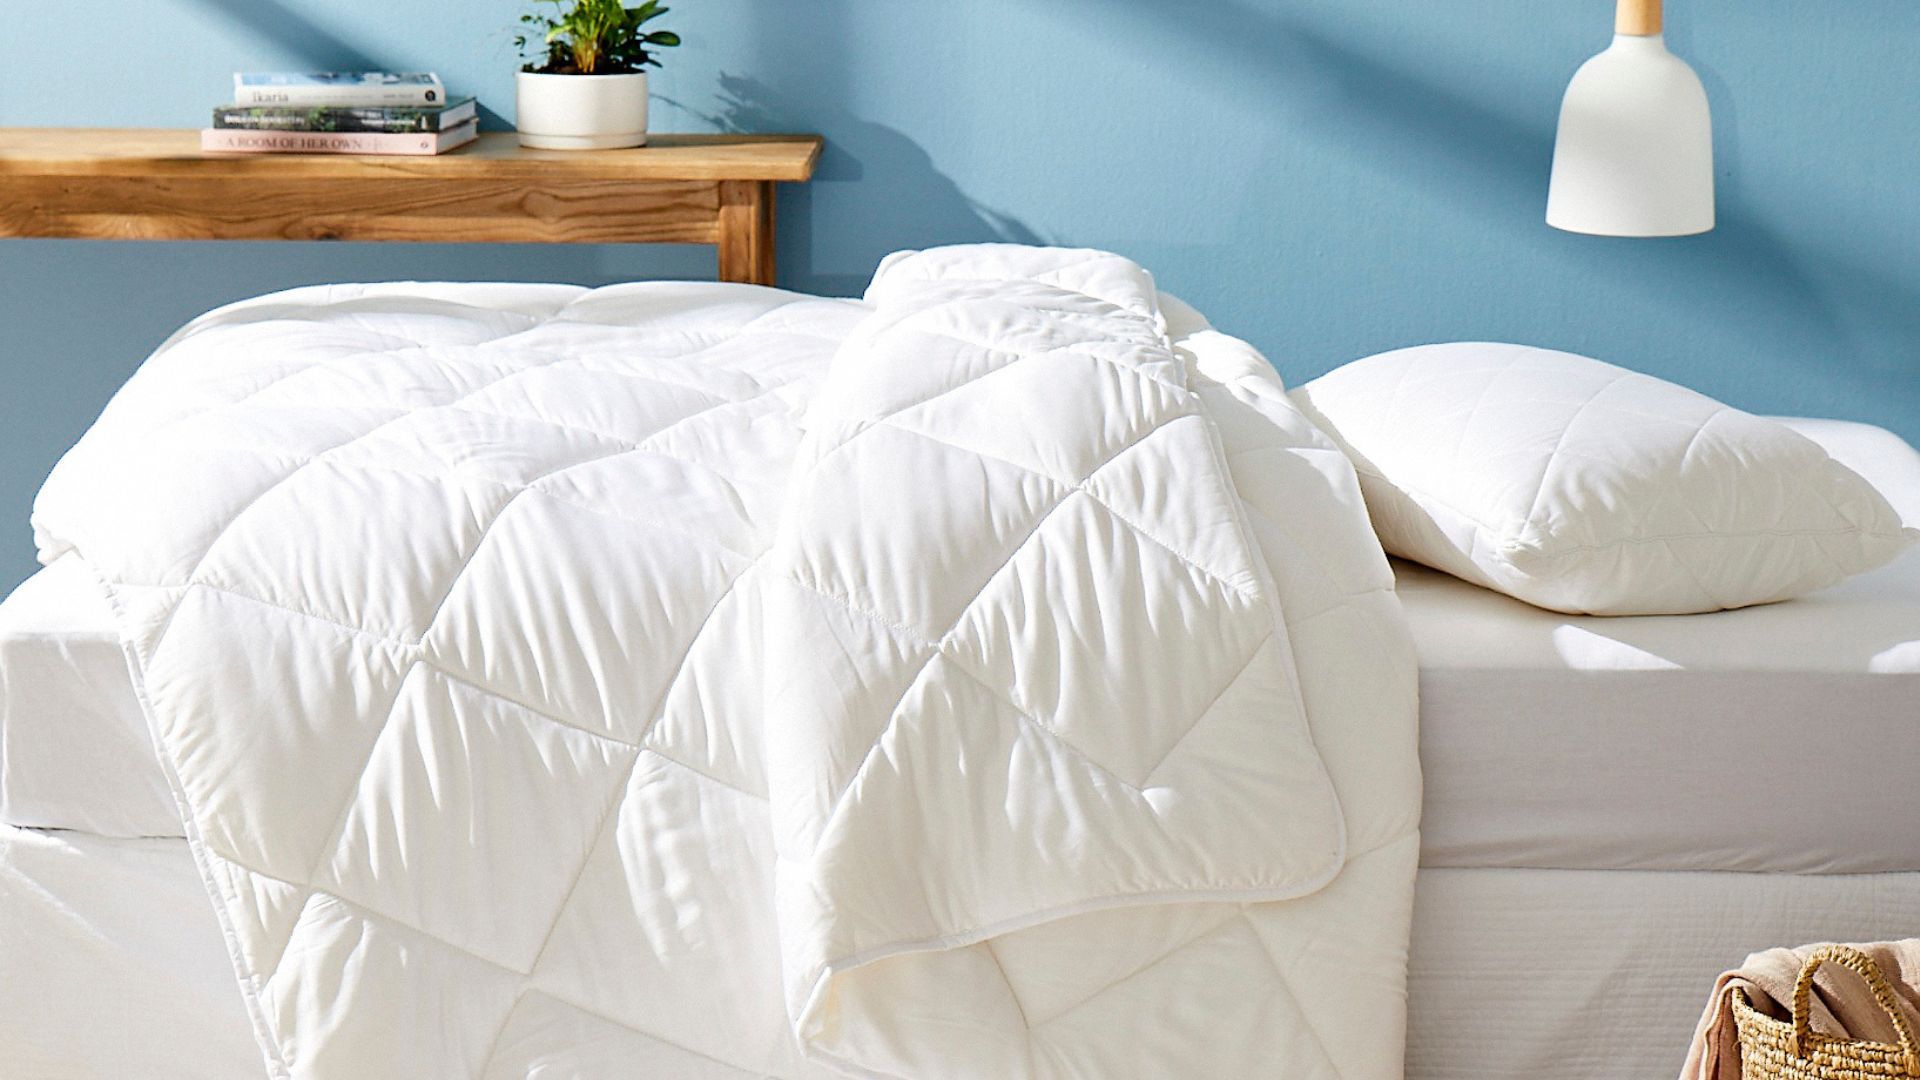 How to pick the best Tontine Pillows for your bed